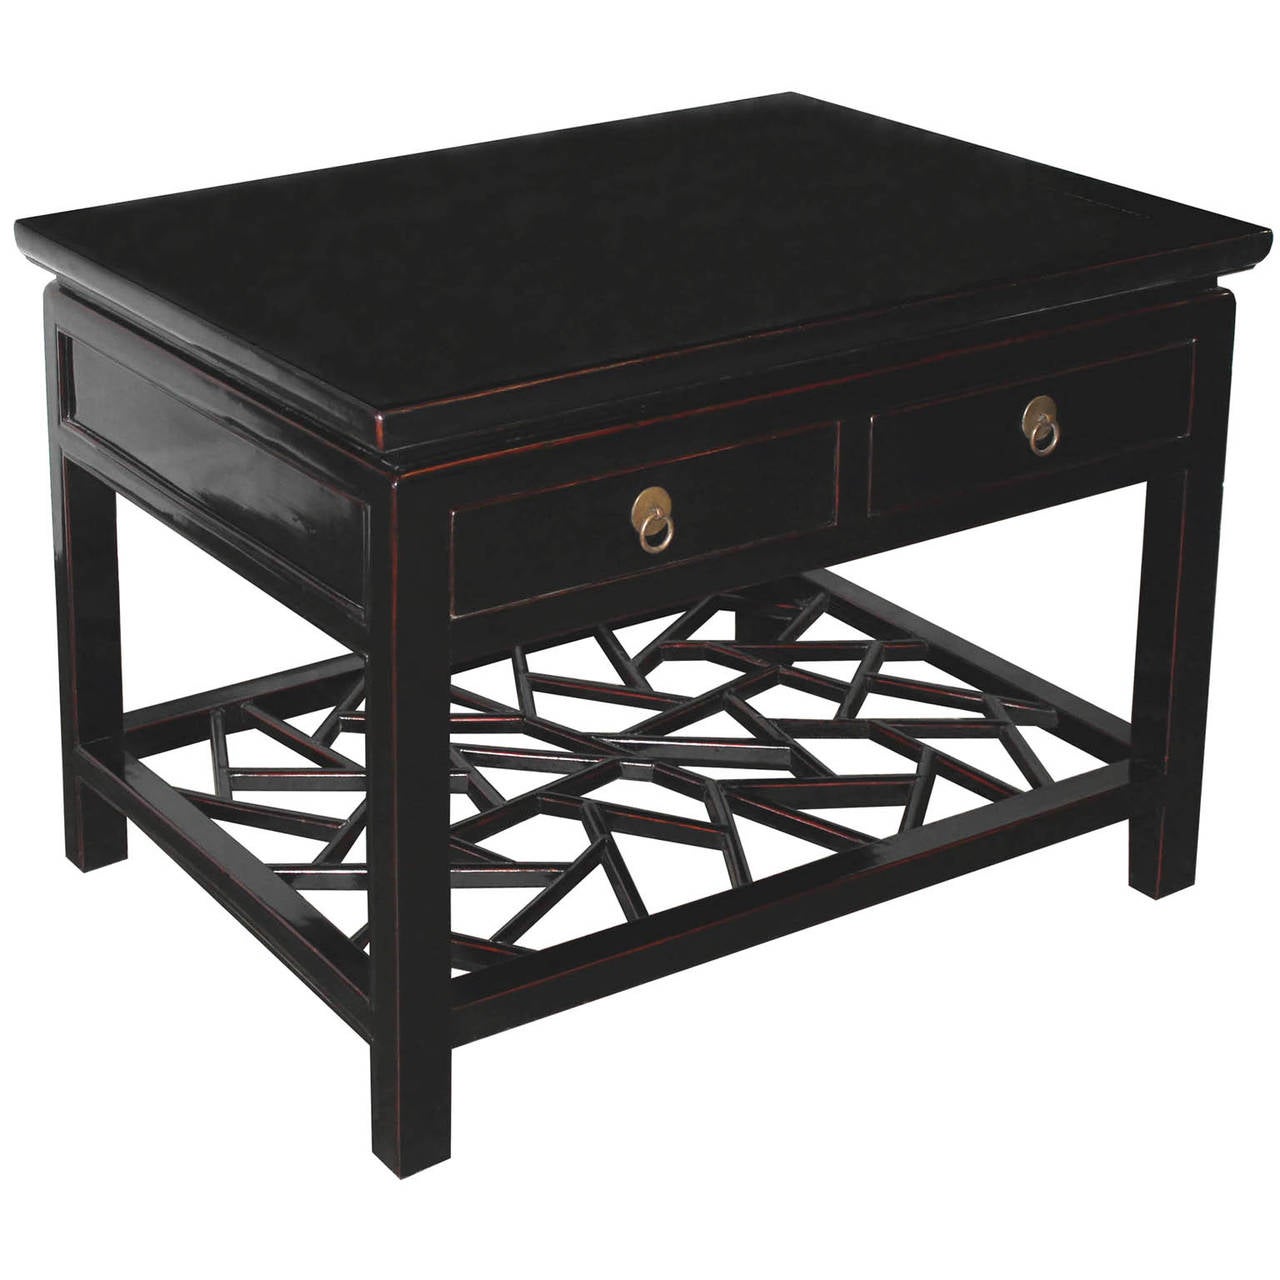 Elegant four-drawer coffee table with exposed rubbed edges, straight legs, and cracked ice bottom shelf. Display in front of couch and place a short stack of books below.